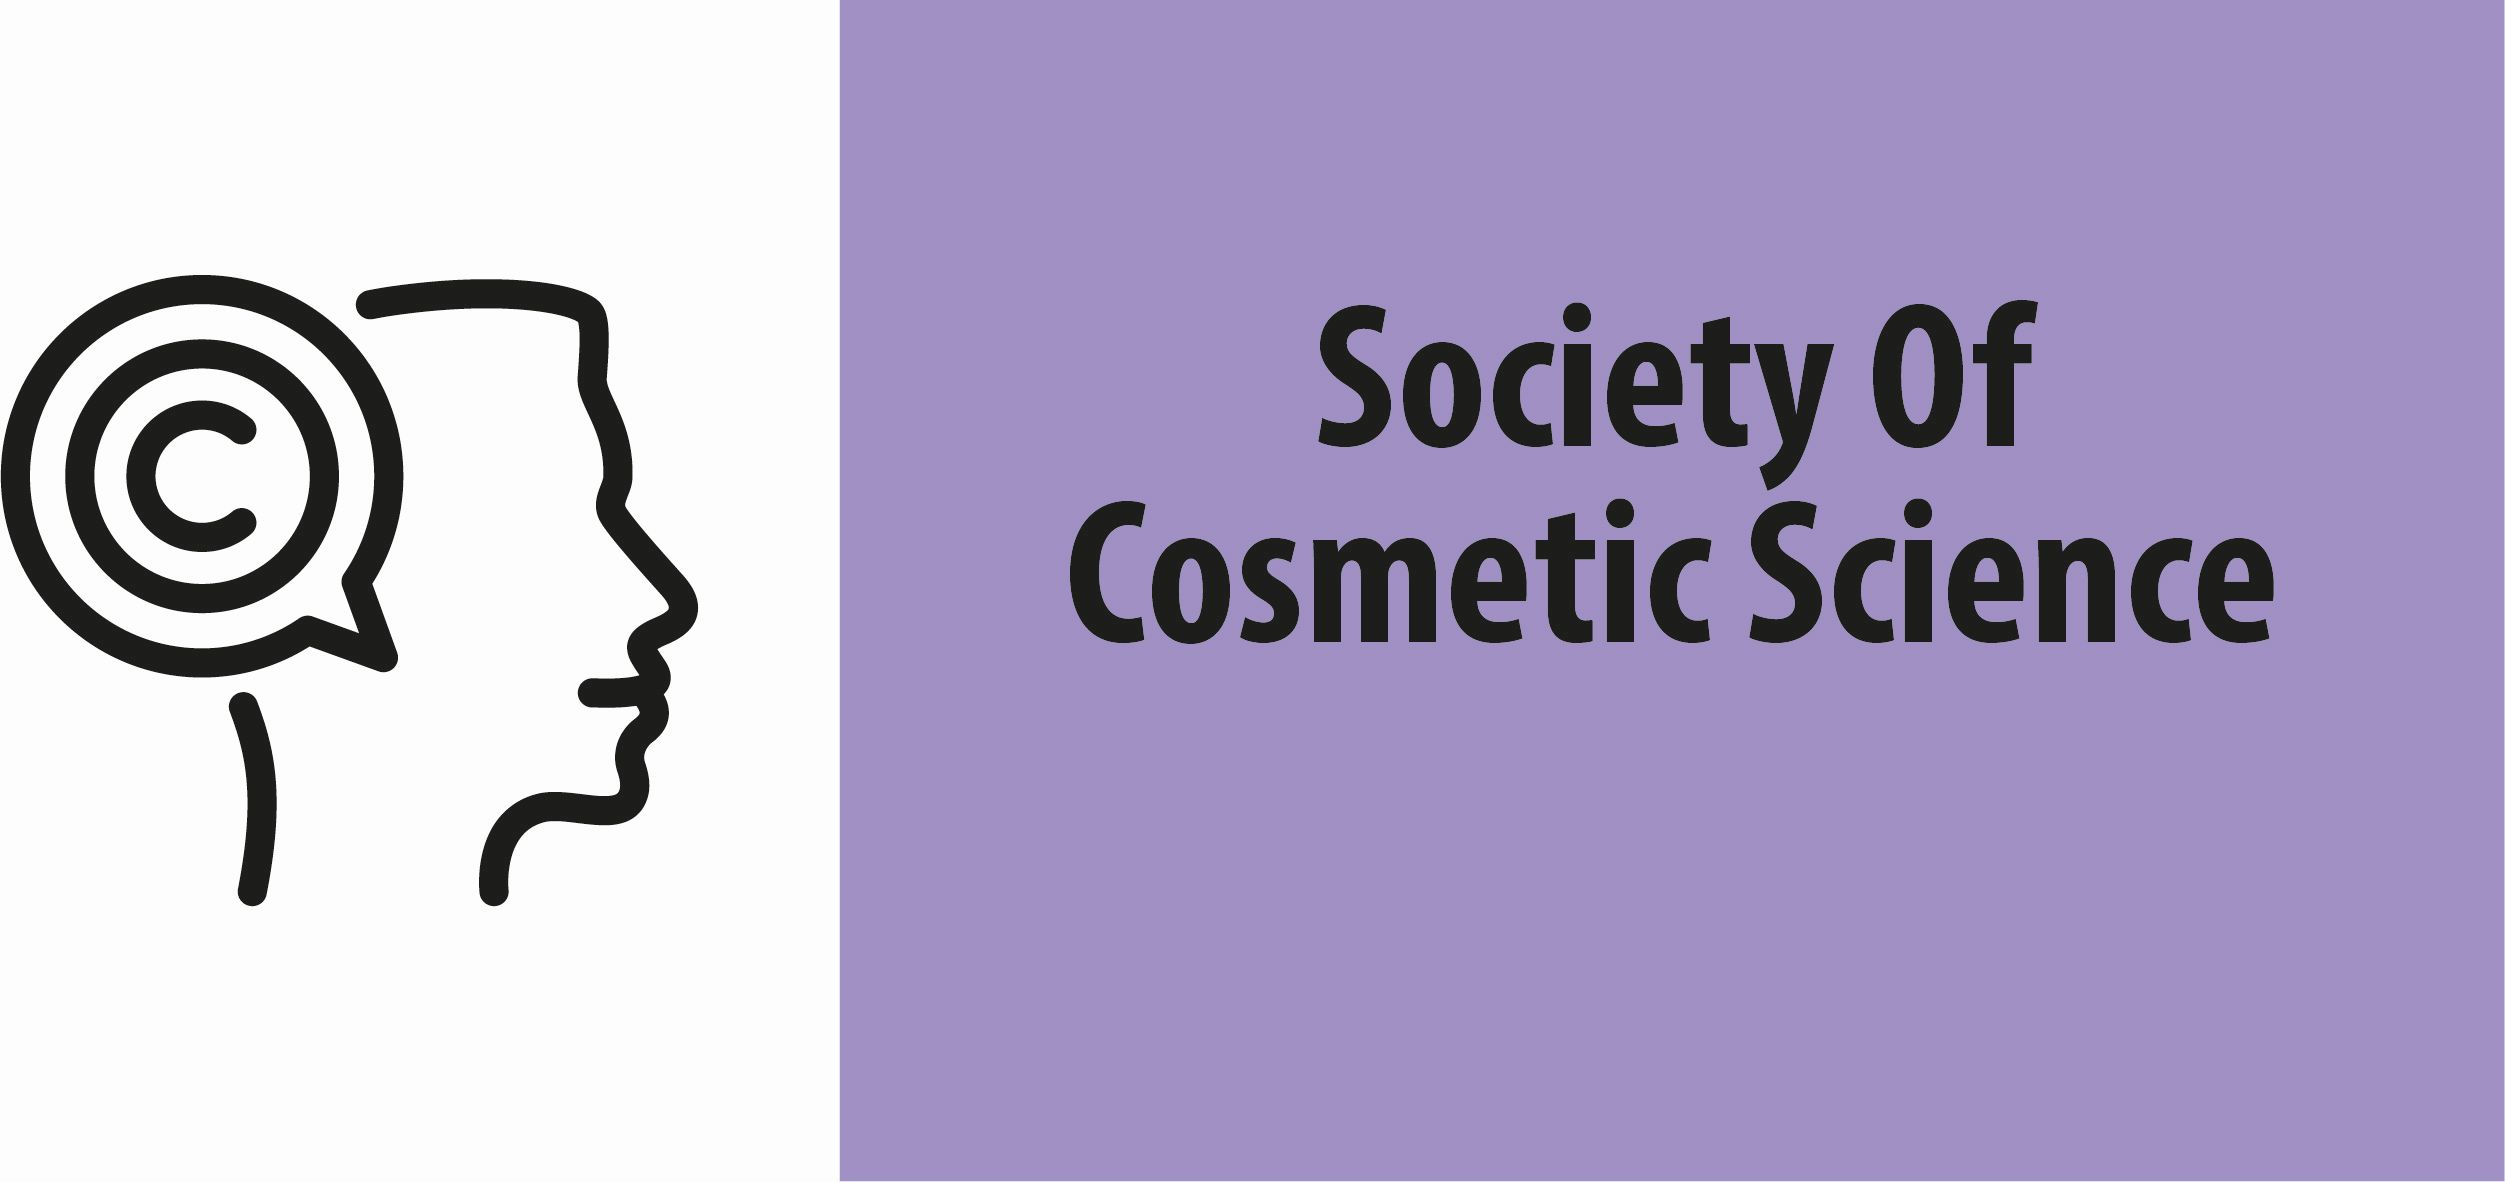 Cosmetic Science